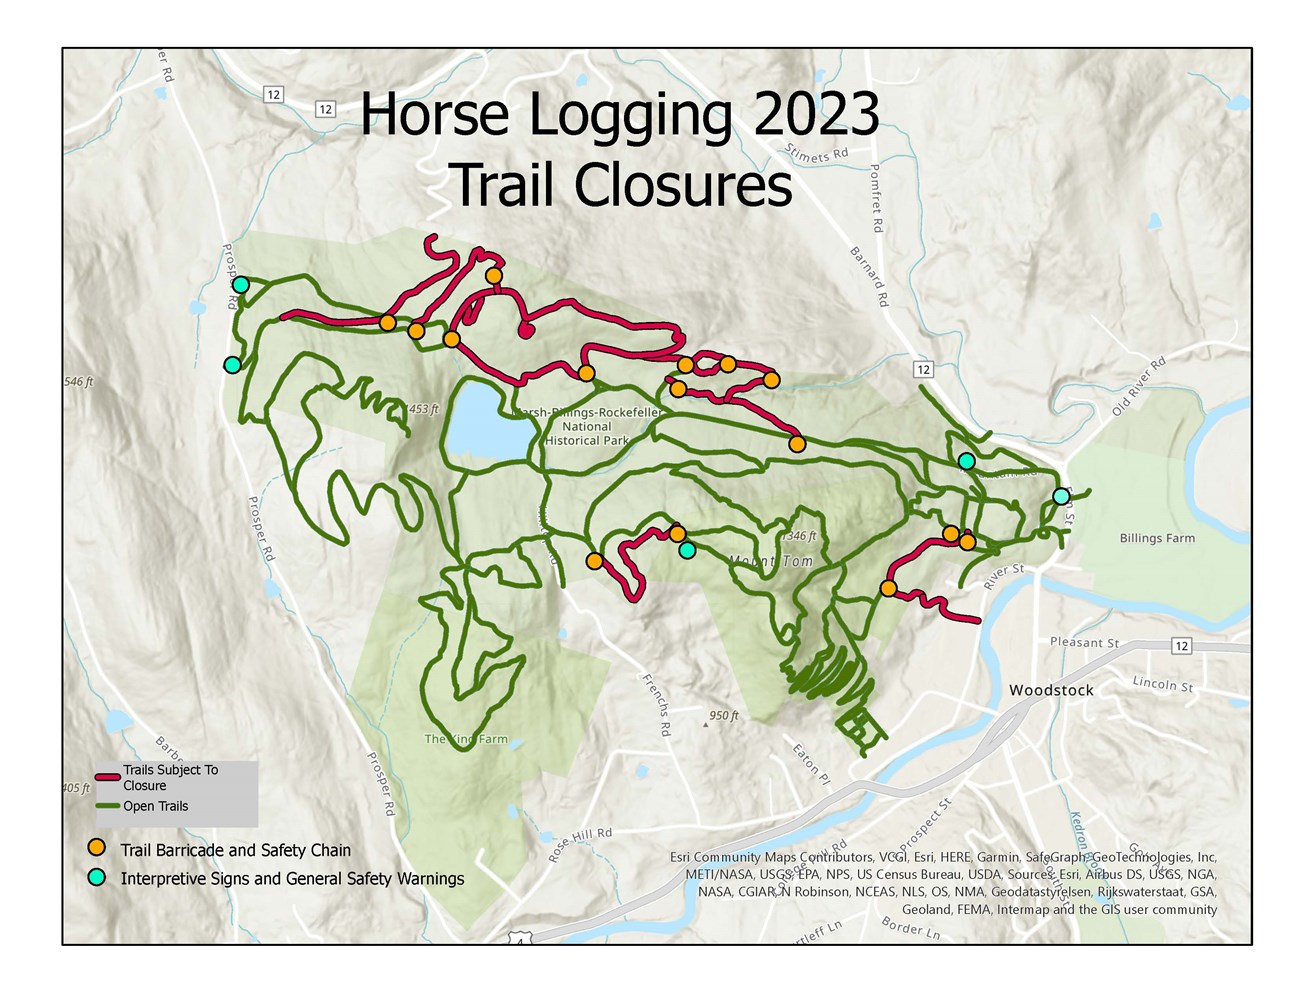 Map titled "Horse Logging 2023 Trail Closures" showing trails of MBR with red overlaid on some trails and green on others, showing where trail barricades and safety chains and interpretive signs are located